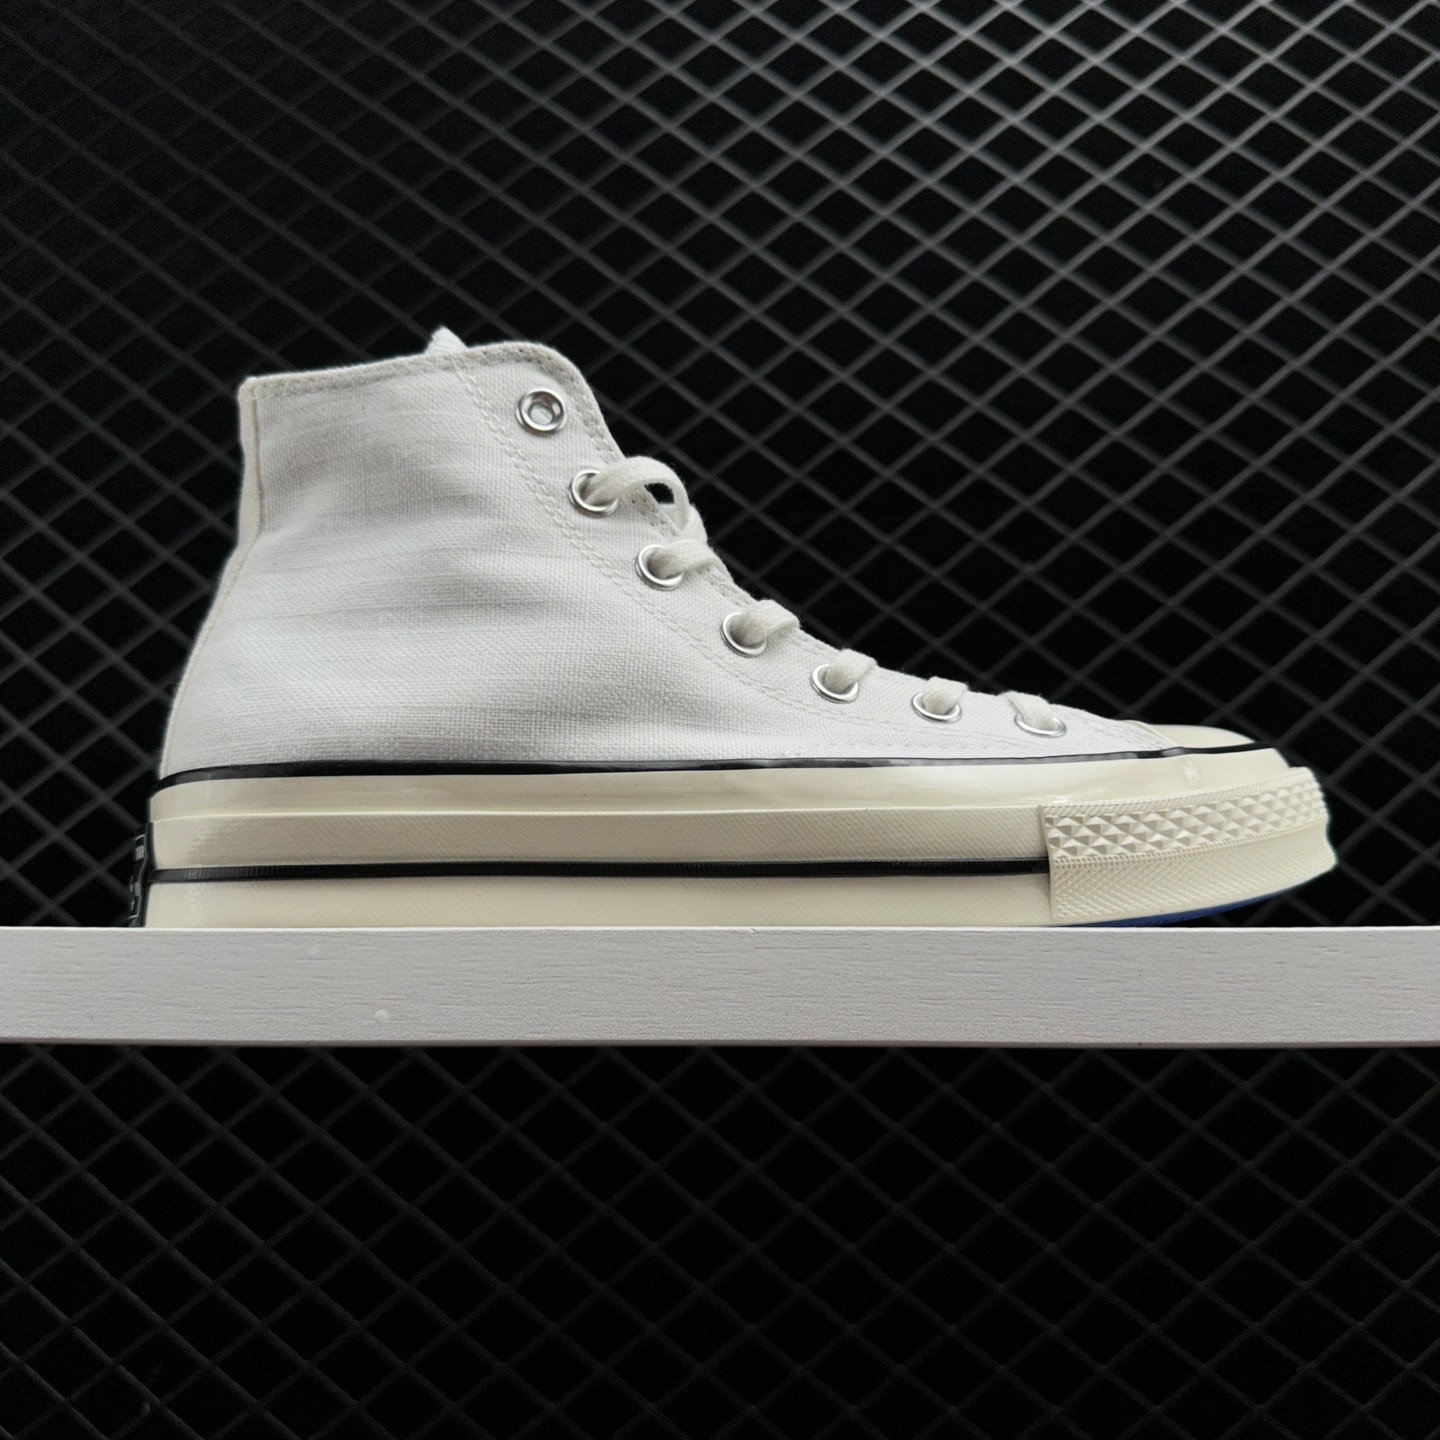 Converse Chuck 70 High 'UV Pack' A06069C - Vibrant Sneakers for Stylish Casual Wear